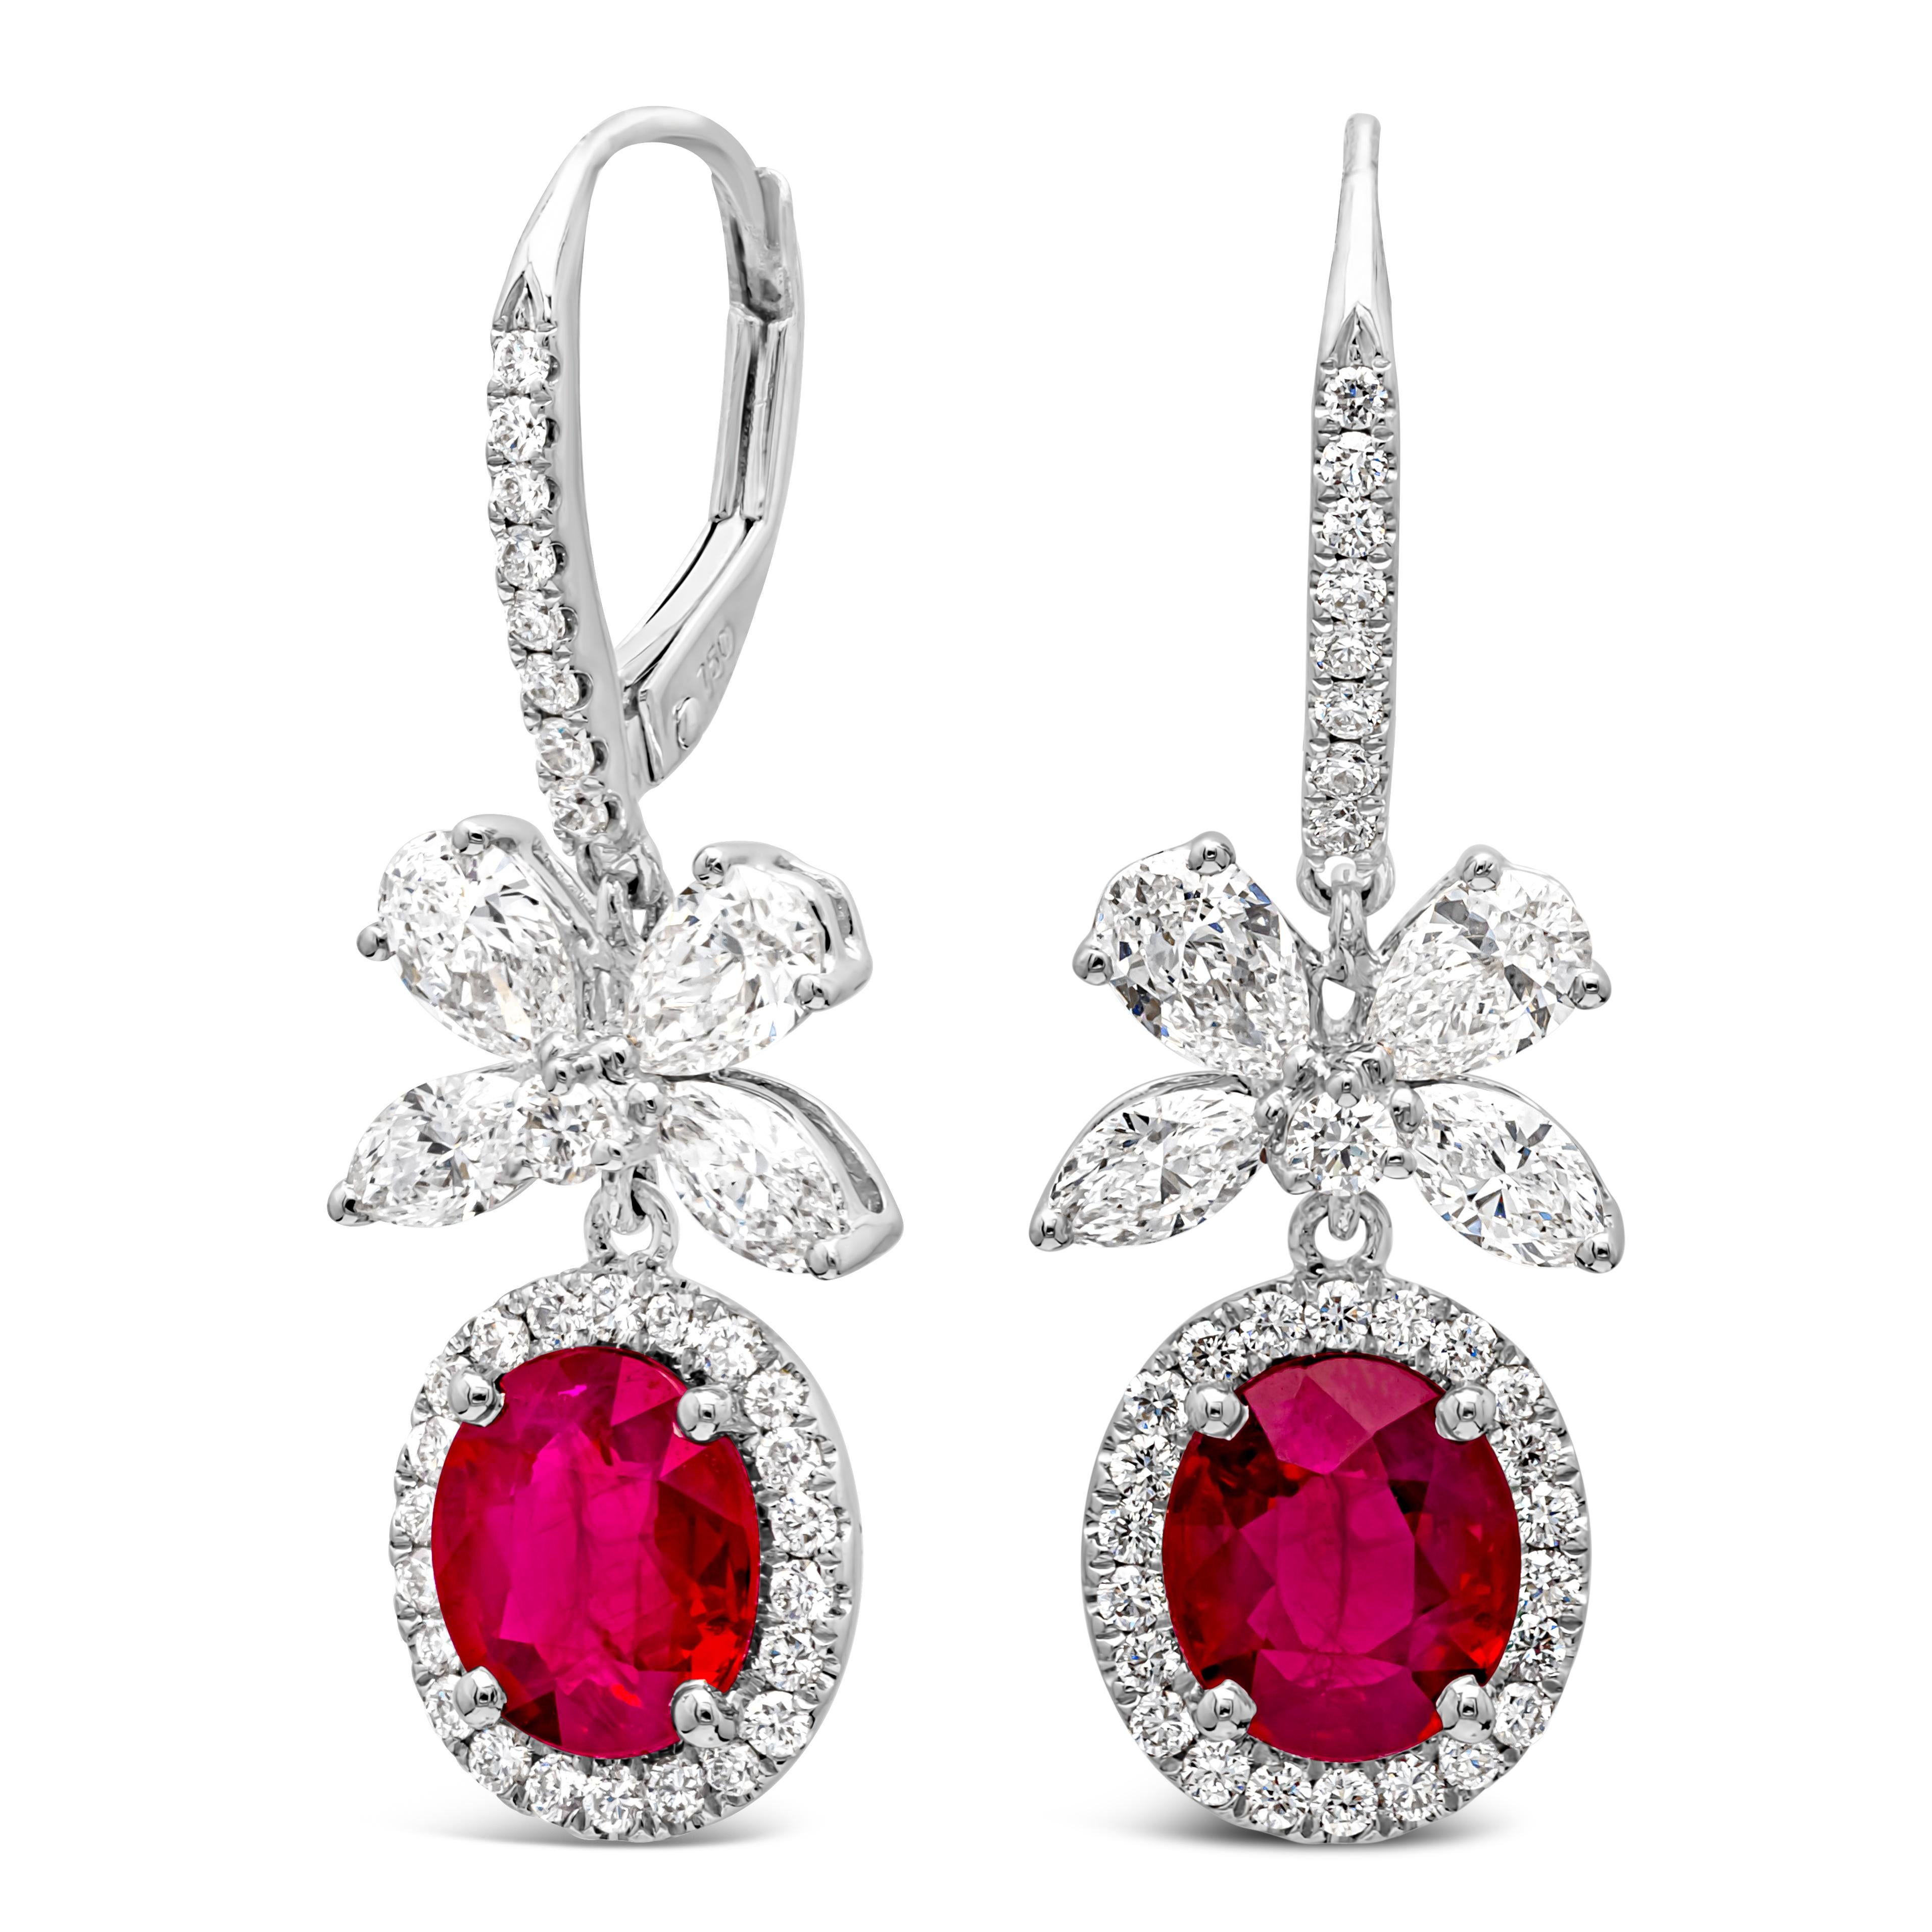 These gorgeous pair of dangle earrings feature an oval cut color-rich ruby in the center weighing 2.56 carats total, surrounded by a row of brilliant round diamonds in a halo design. A bow-like figure made with diamonds hang on top of the ruby halo